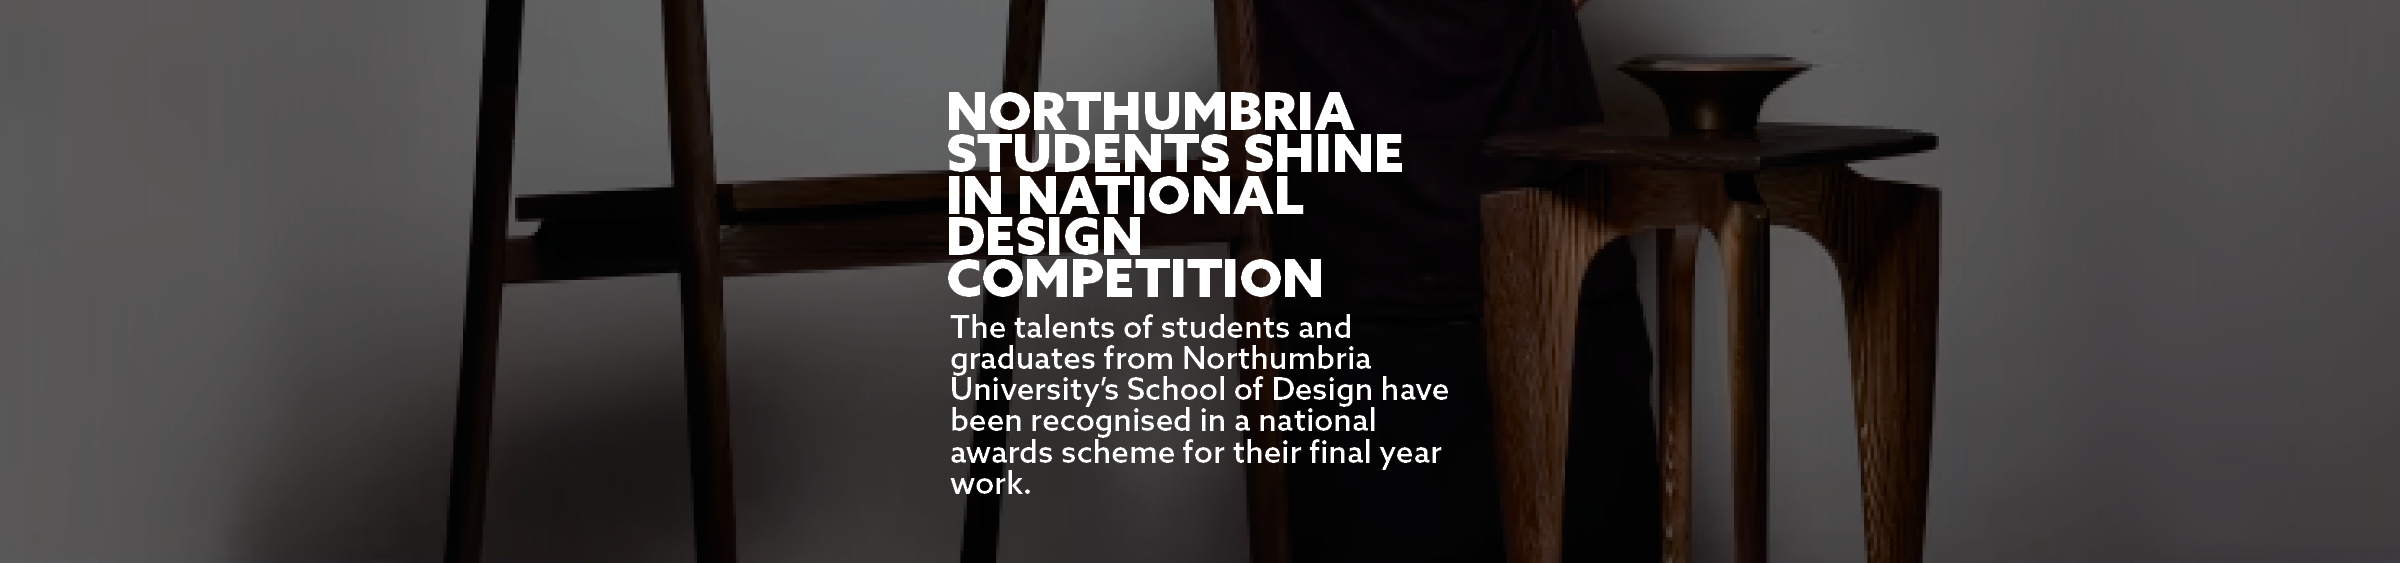 Northumbria students shine in national design competition